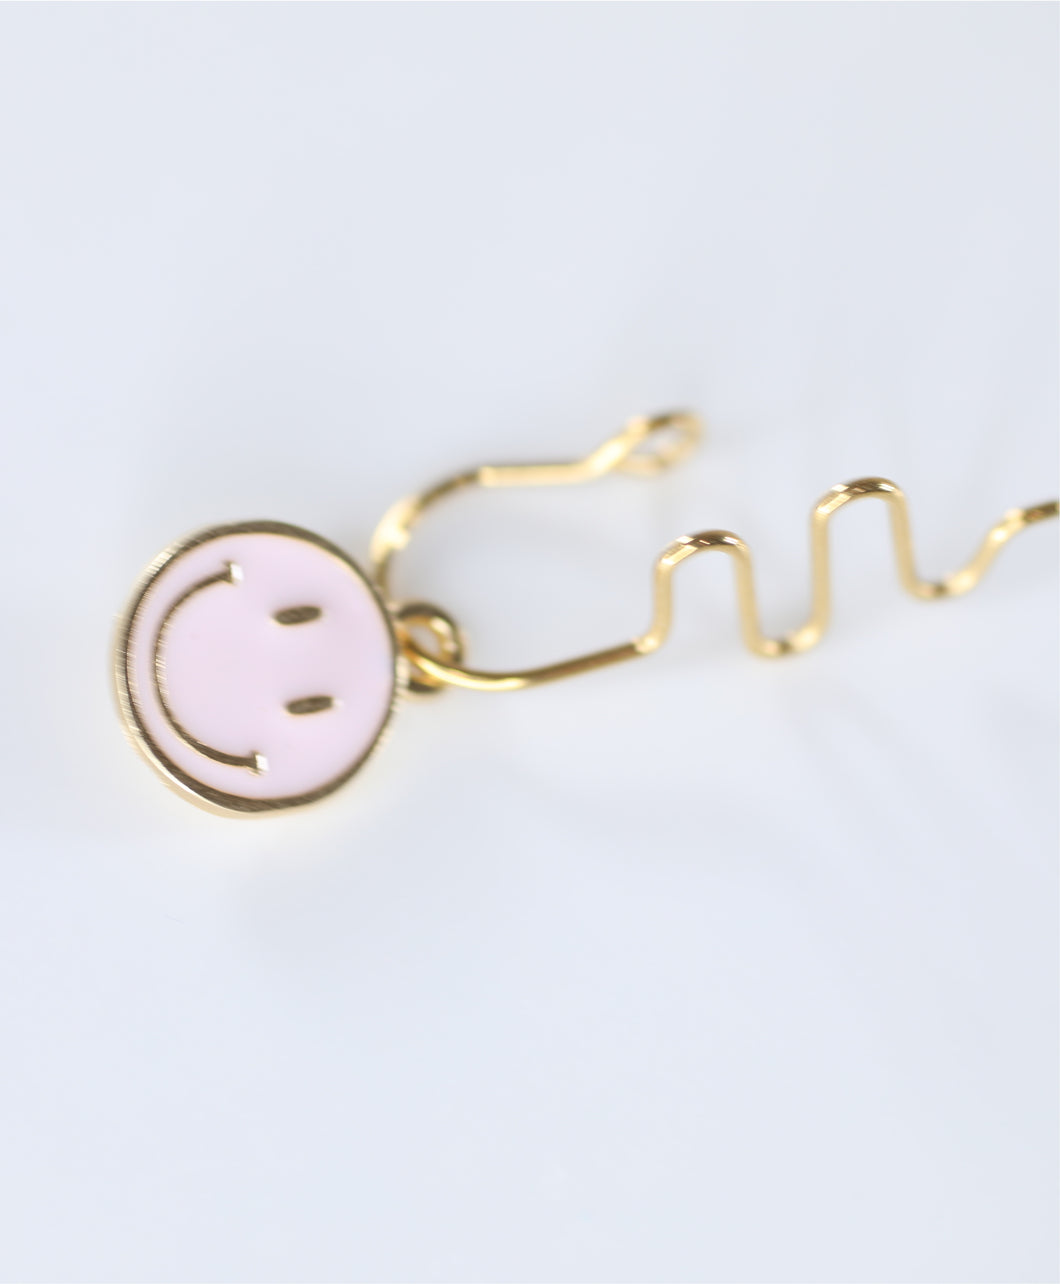 SMILEY FACE NOSE CUFF